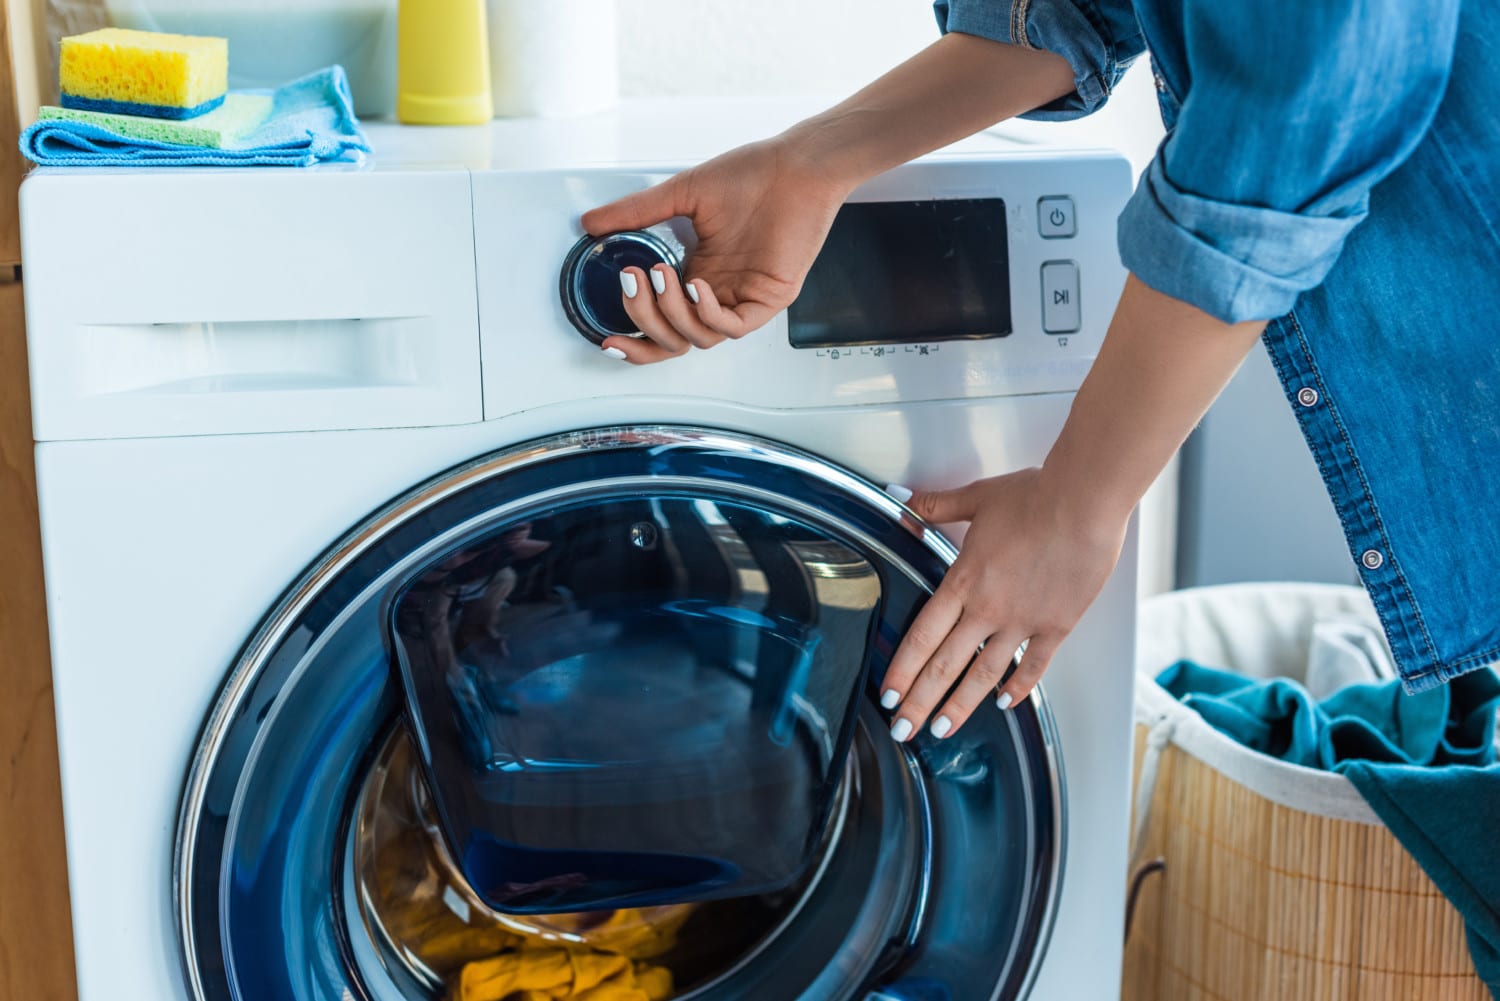 The Washing Machine Can Save Your Hands